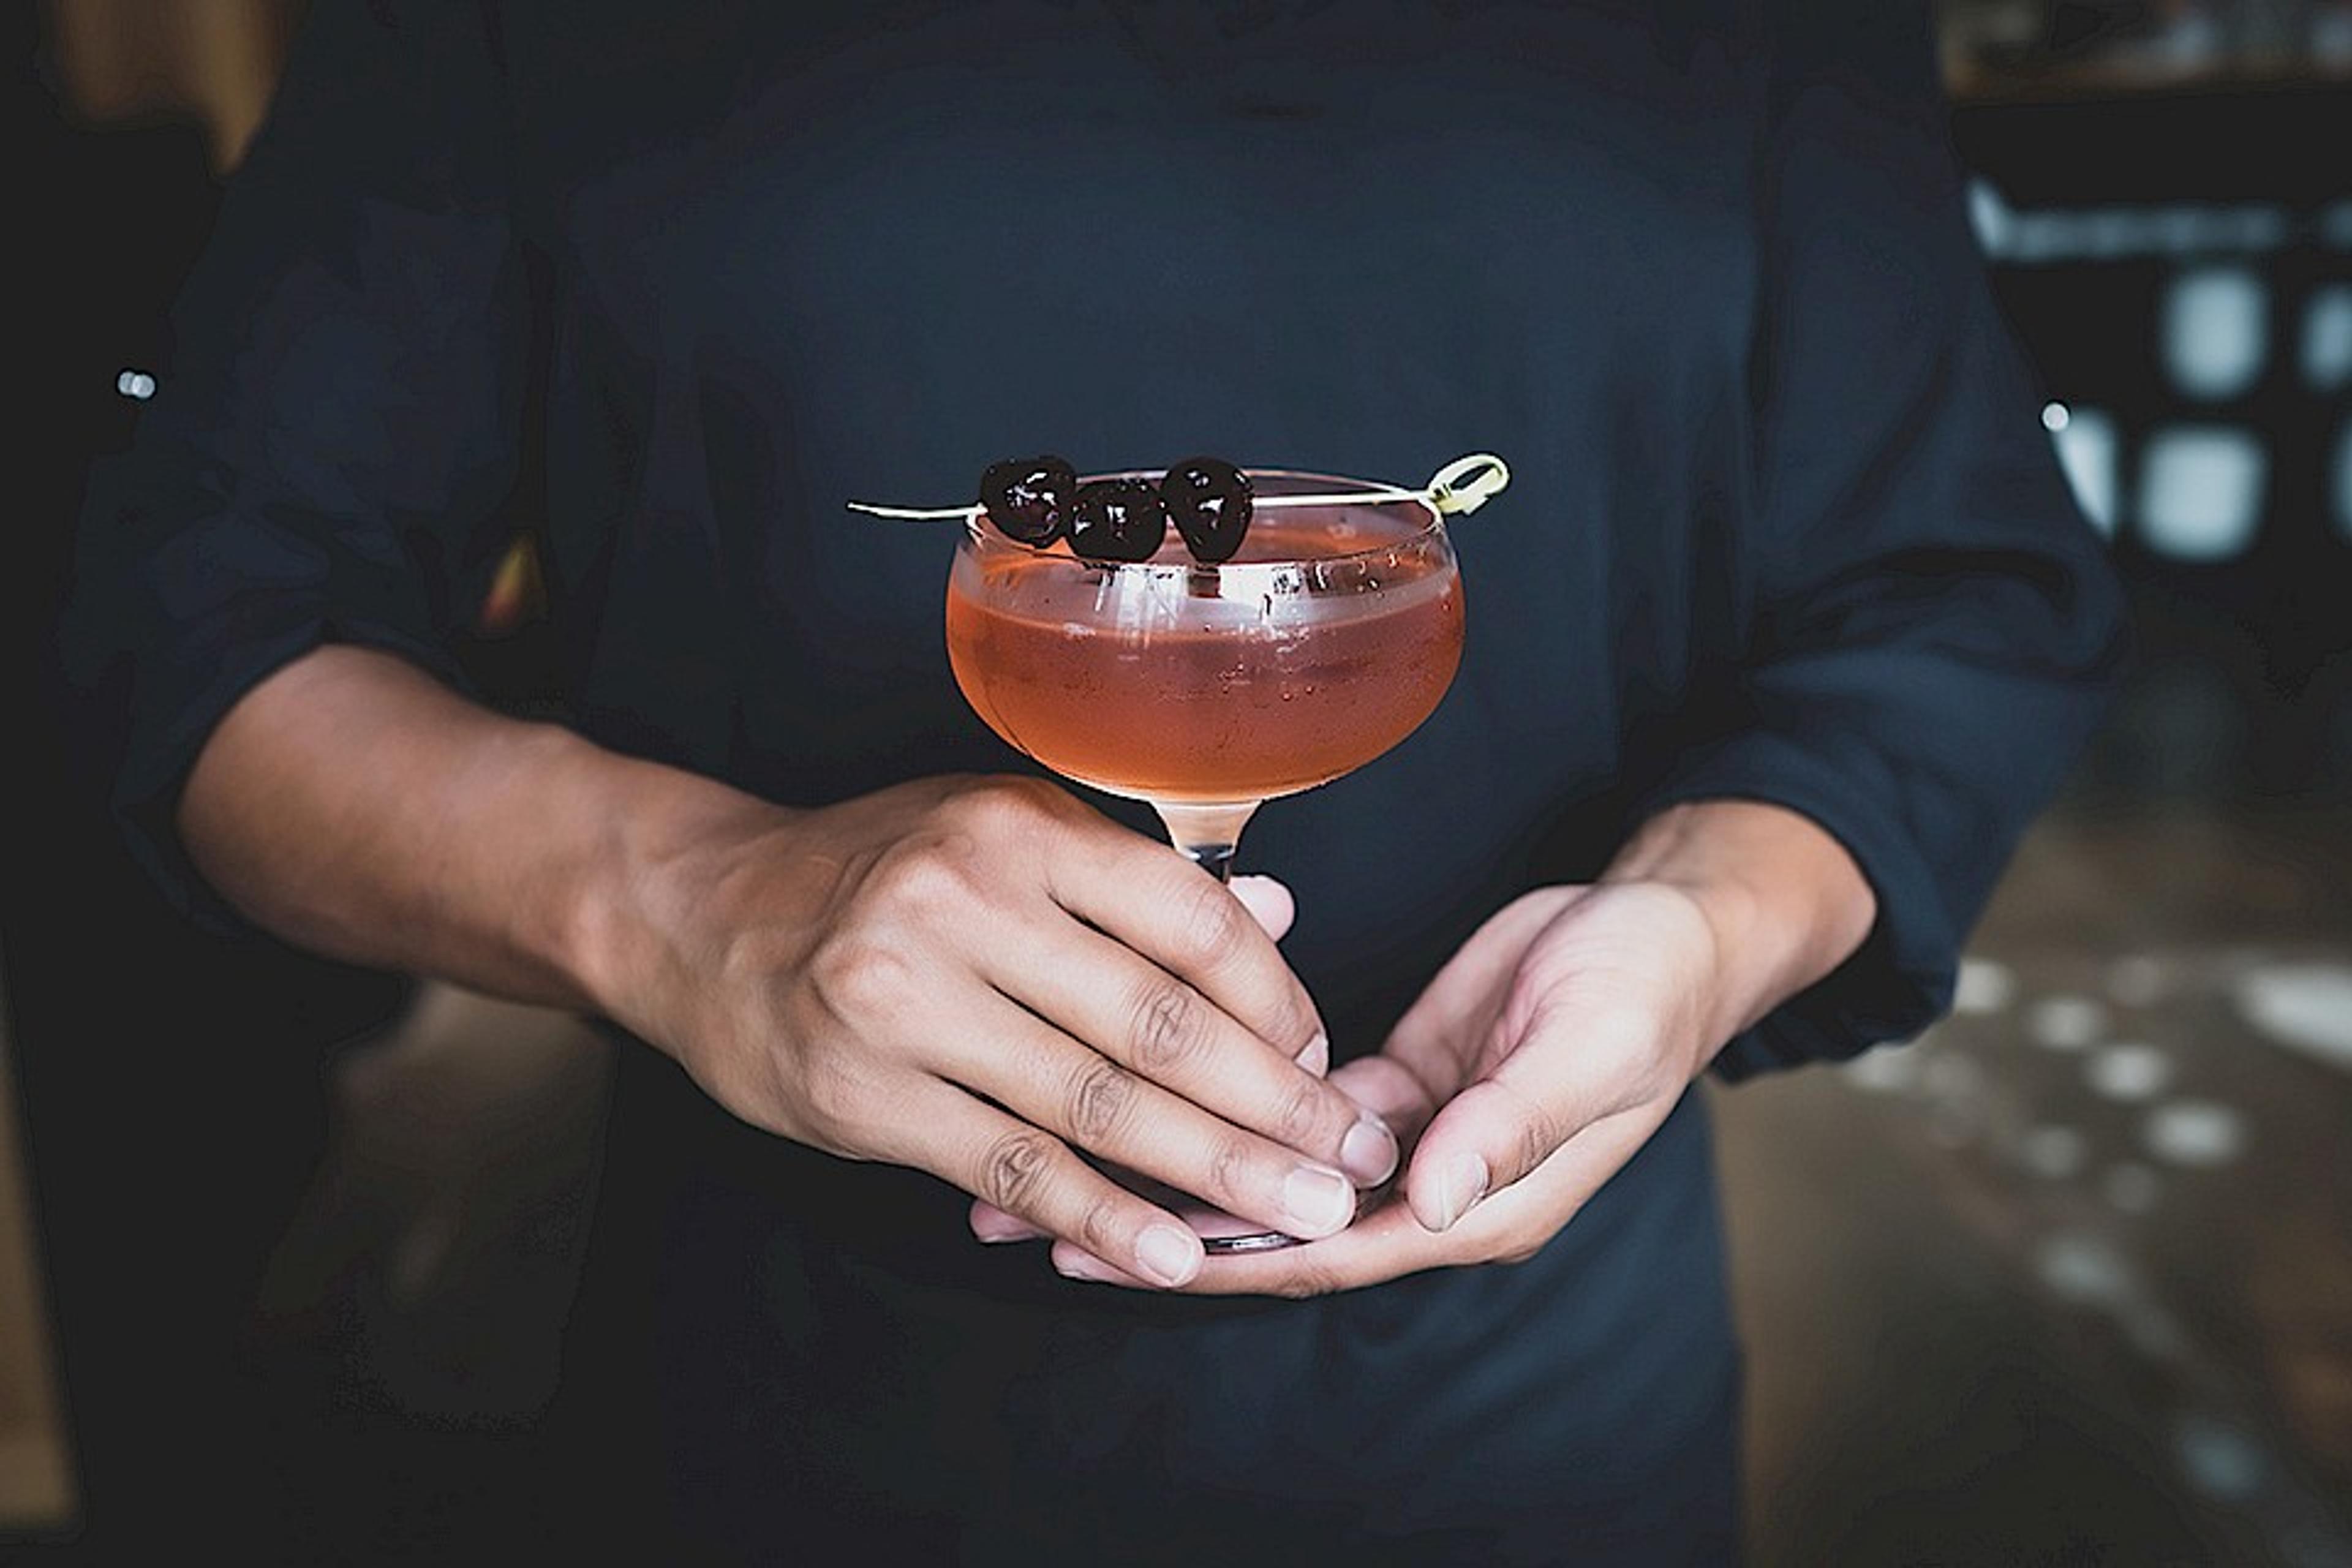 Server holding cocktail with brandied cherries in coupe glass